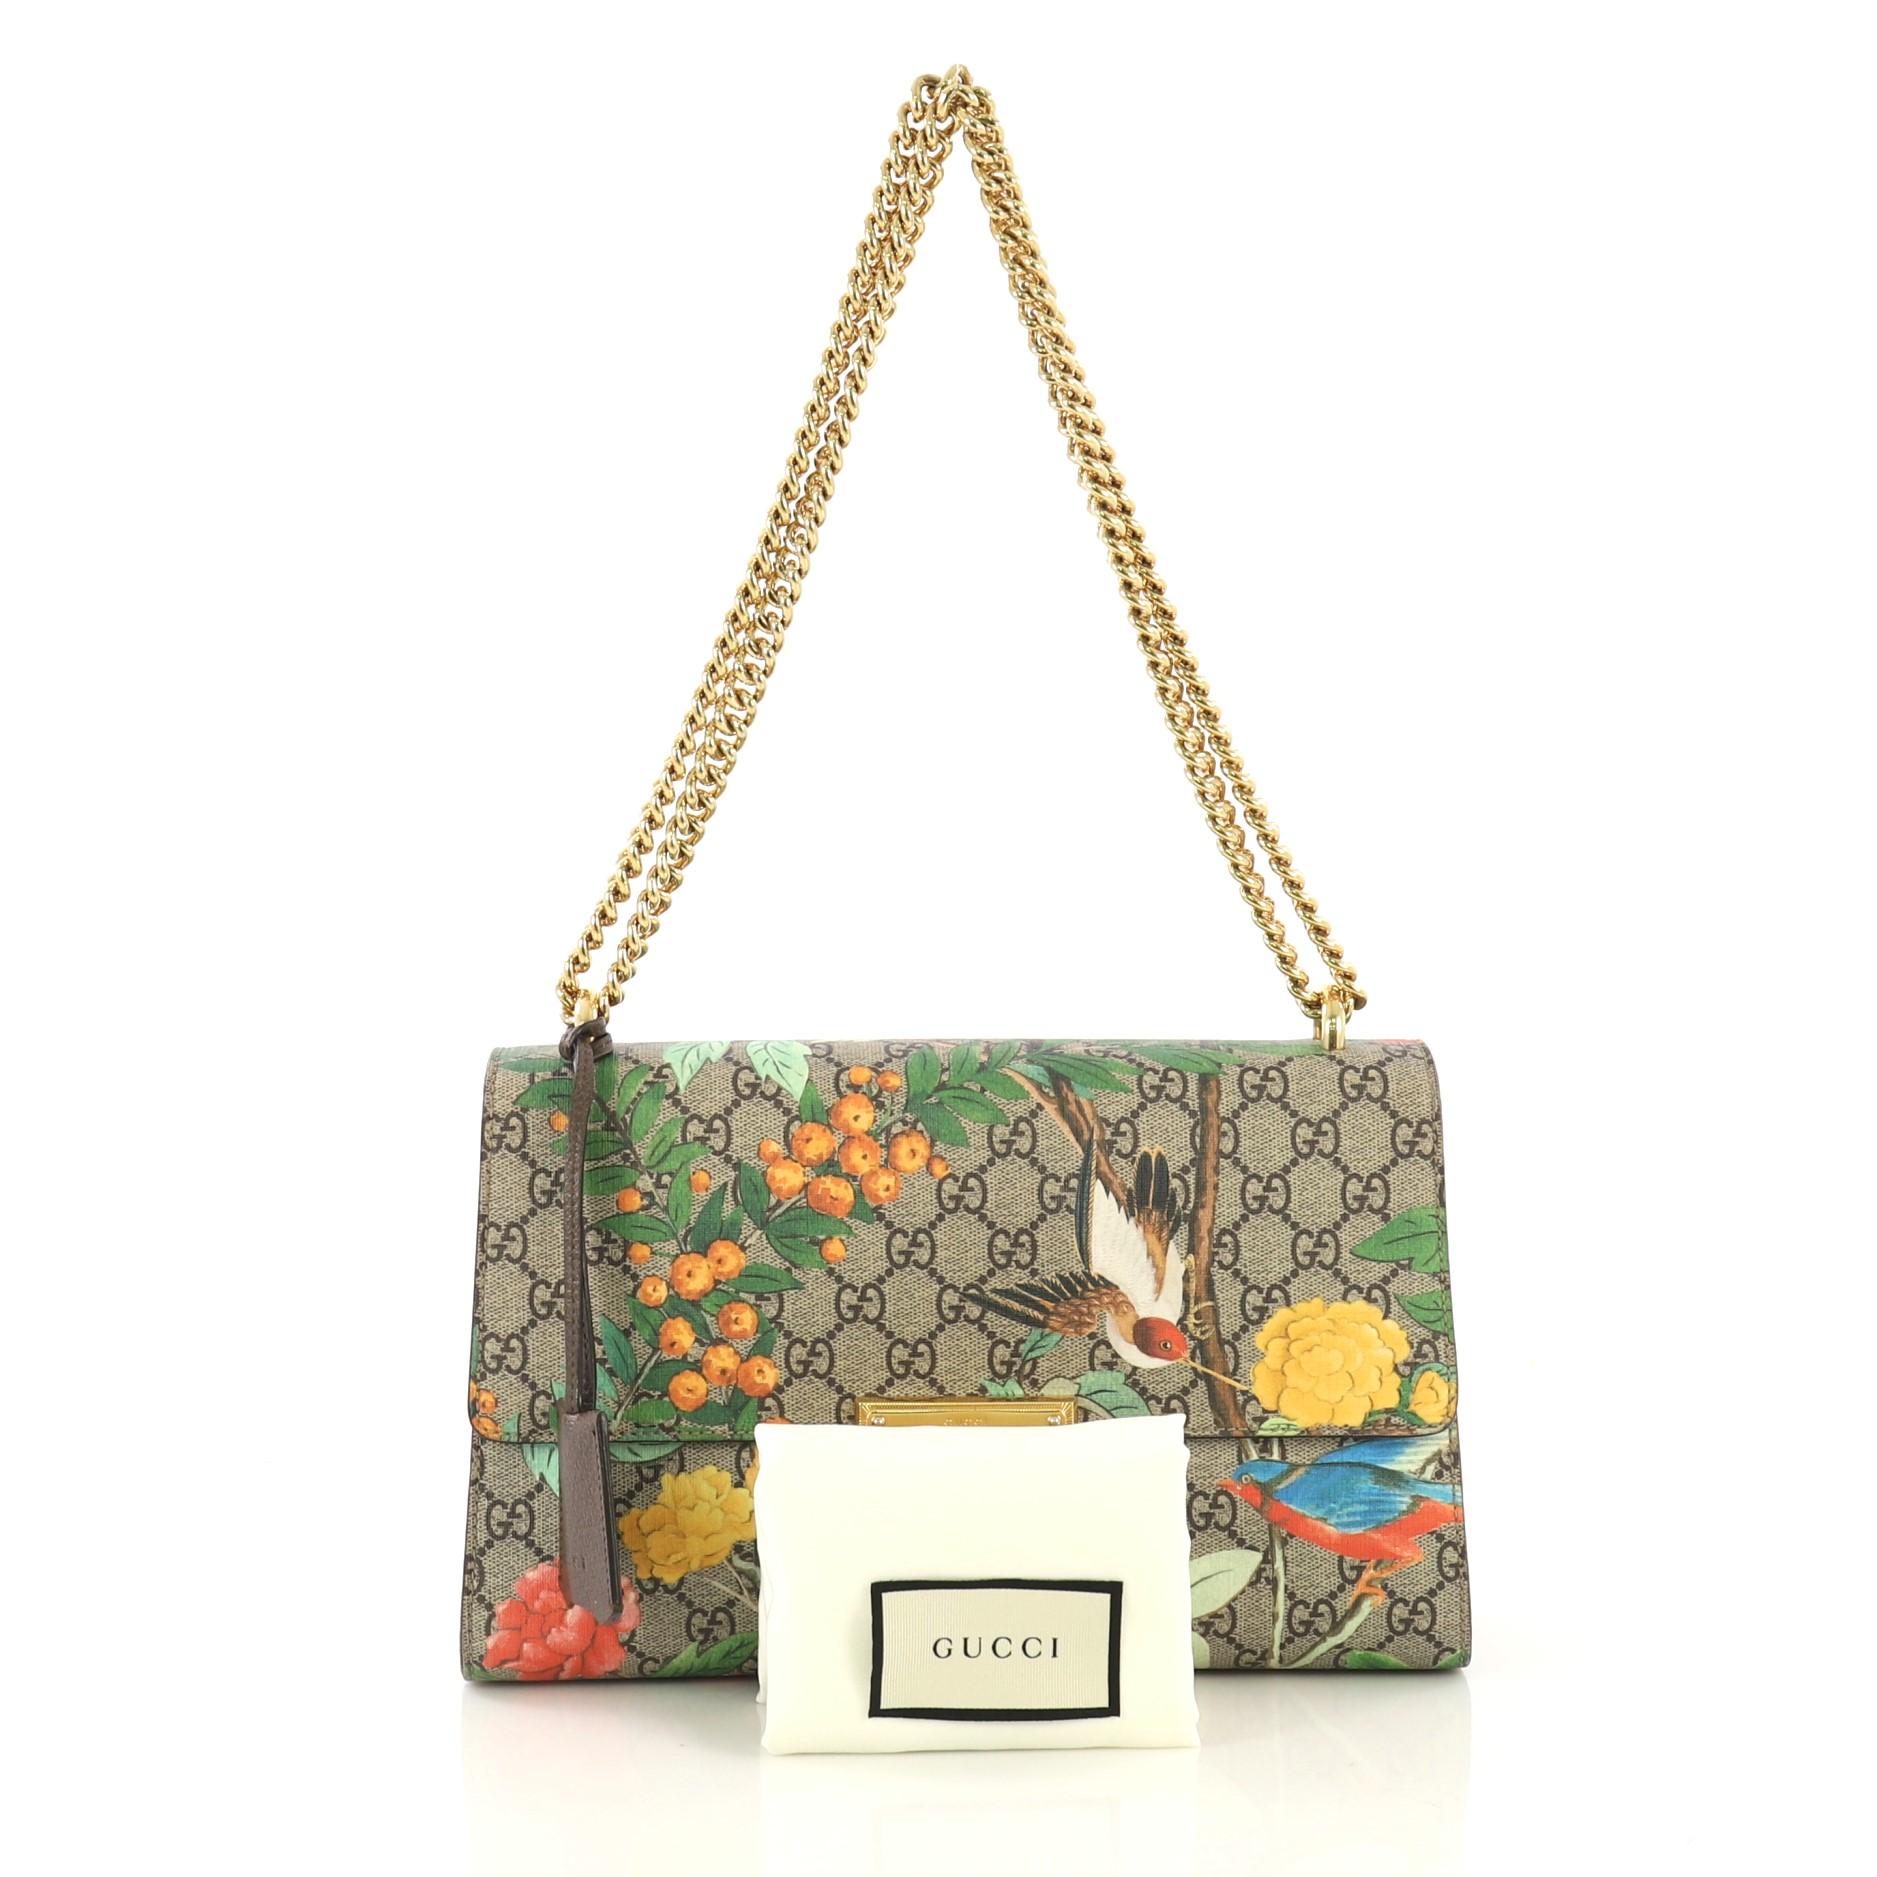  This Gucci Padlock Shoulder Bag Tian Print GG Coated Canvas Medium, crafted in Tian print light brown GG coated canvas, features chain-link strap, exterior back pocket, and gold-tone hardware. Its push-lock closure opens to a brown microfiber